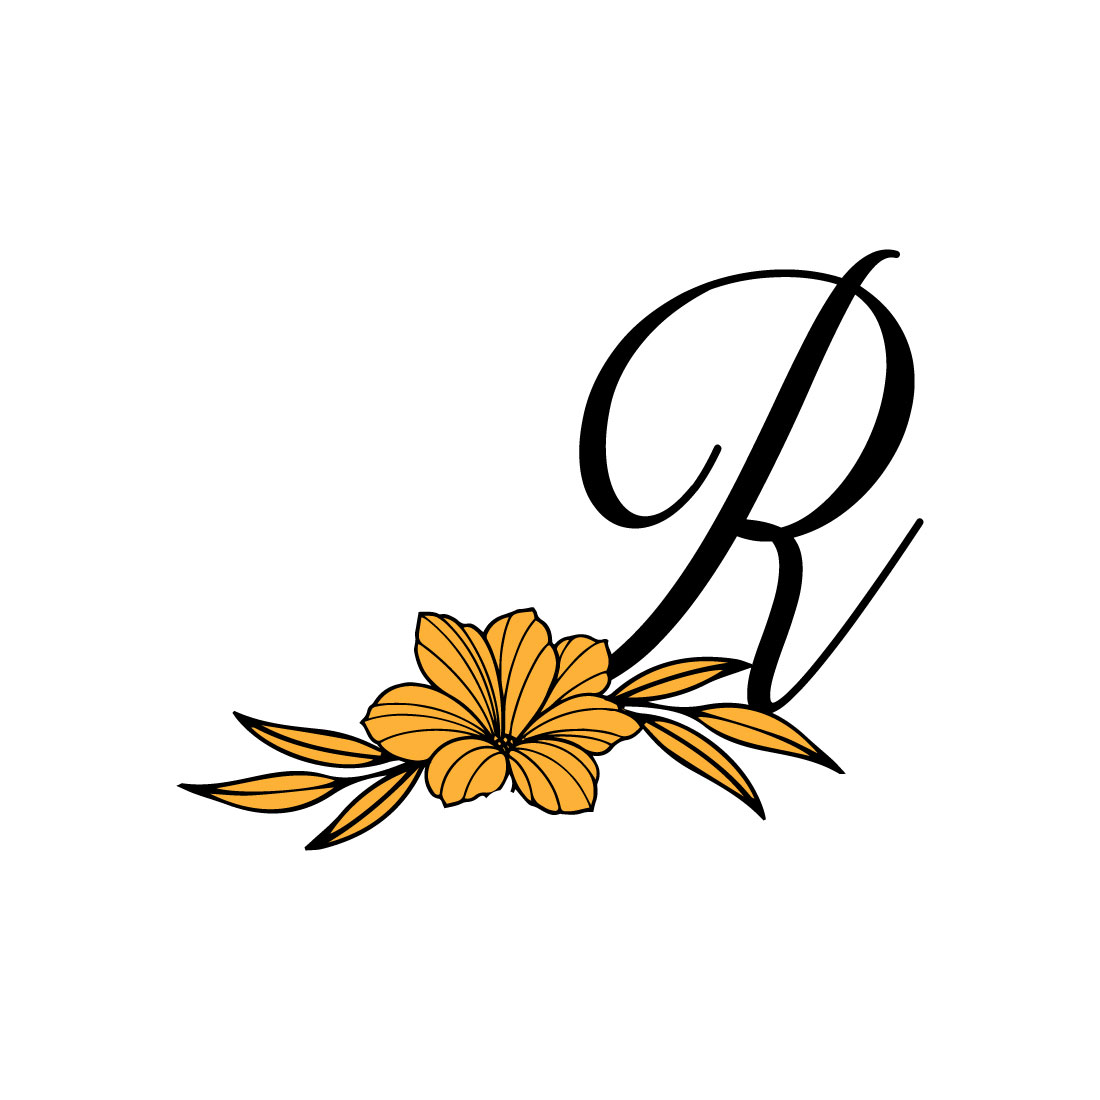 Free R Letter Beautiful Flower Logo cover image.